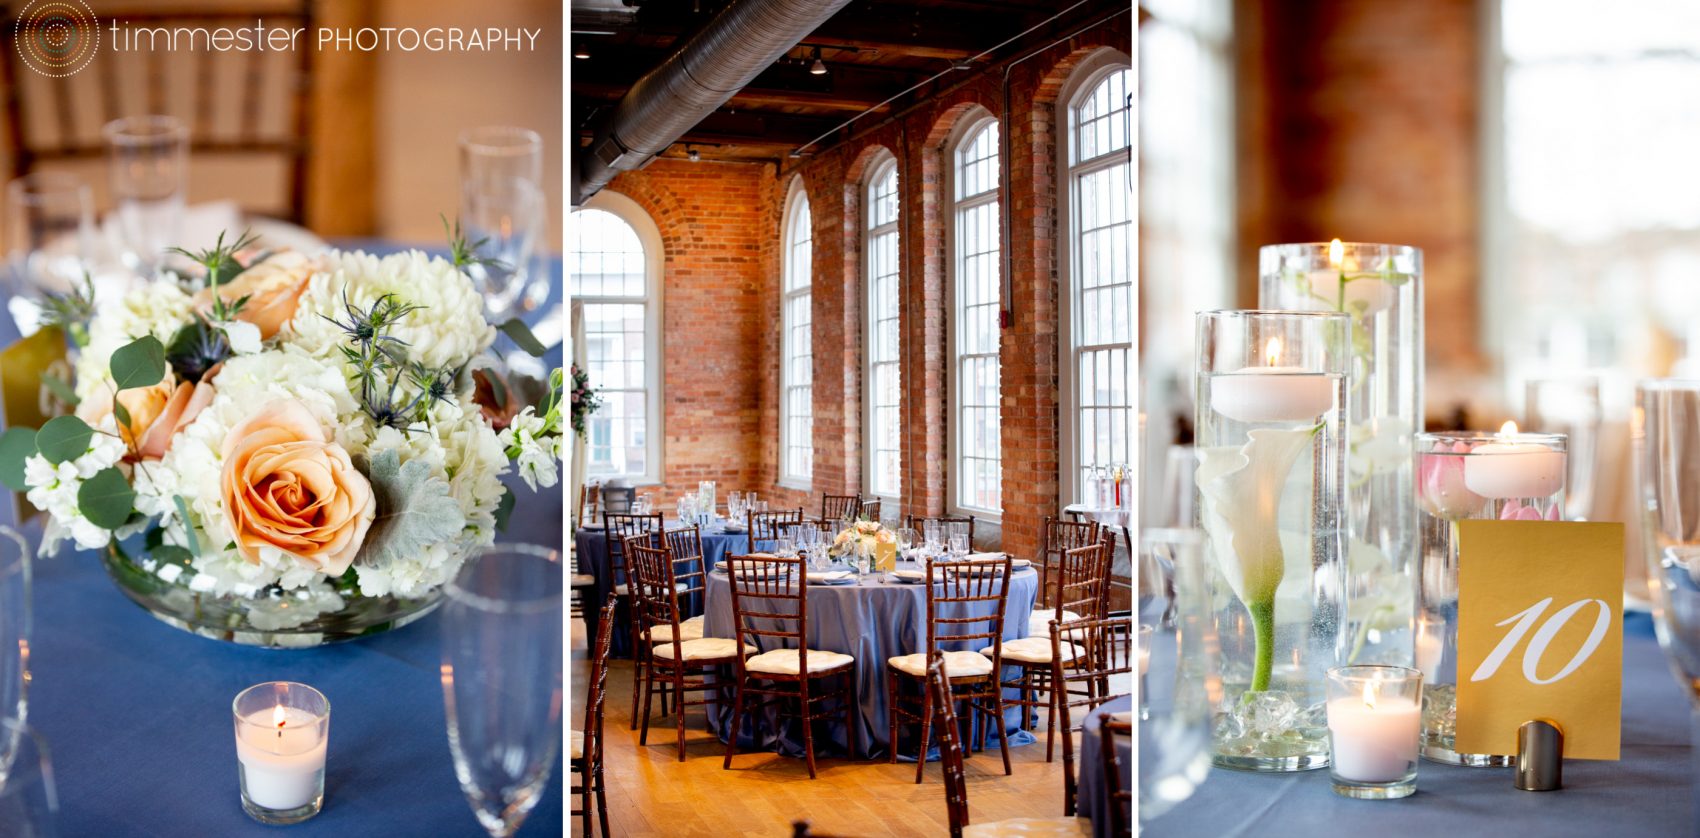 A winter, February wedding at The Cotton Room in Durham, NC.